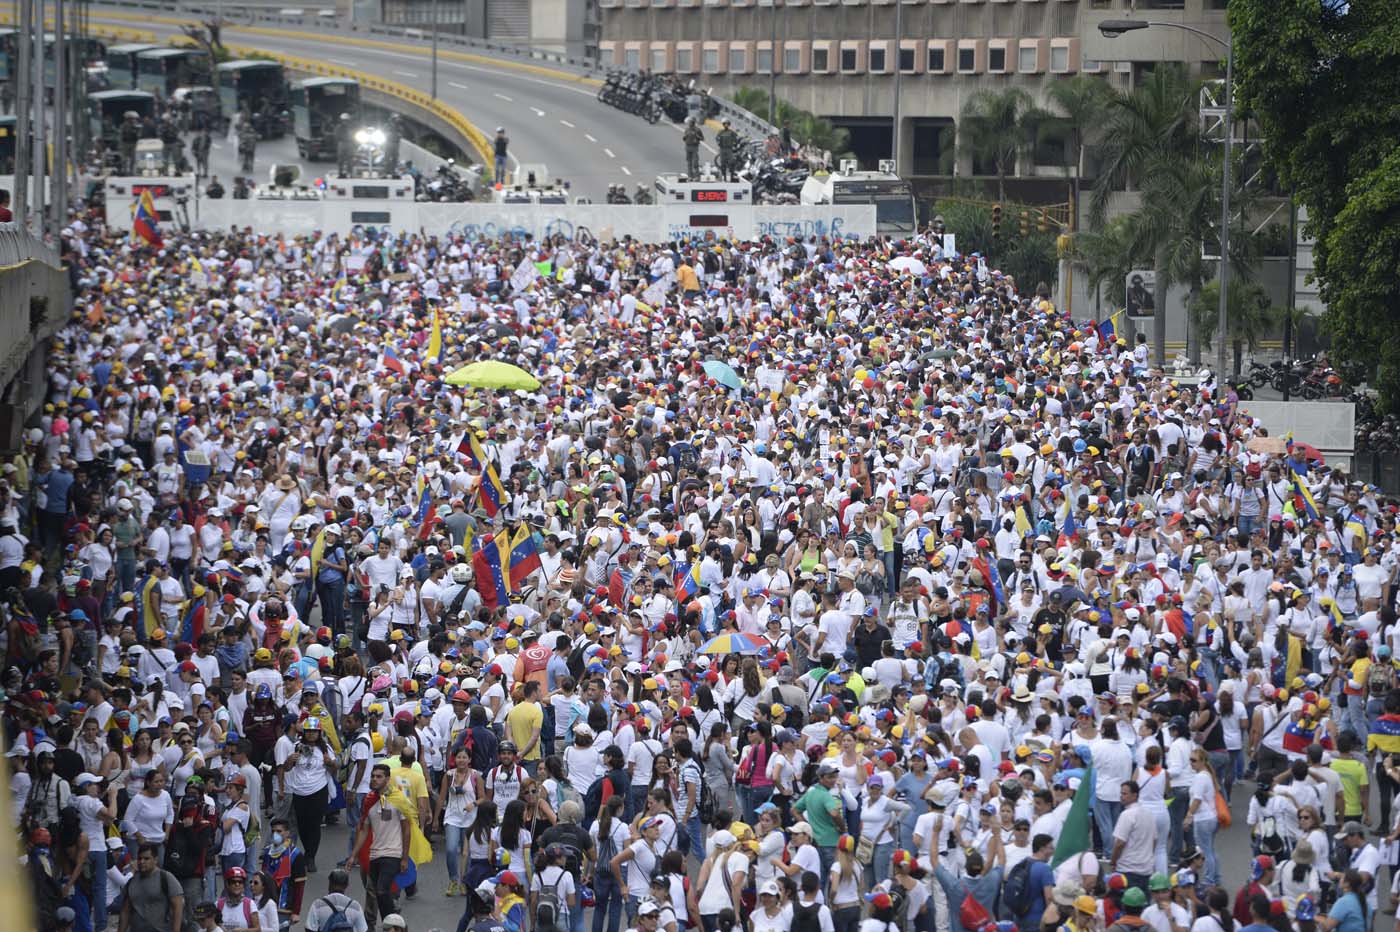 Venezuelan opposition activists take part in a women's march aimed to keep pressure on President Nicolas Maduro, whose authority is being increasingly challenged by protests and deadly unrest, in Caracas on May 6, 2017. The death toll since April, when the protests intensified after Maduro's administration and the courts stepped up efforts to undermine the opposition, is at least 36 according to prosecutors. / AFP PHOTO / FEDERICO PARRA